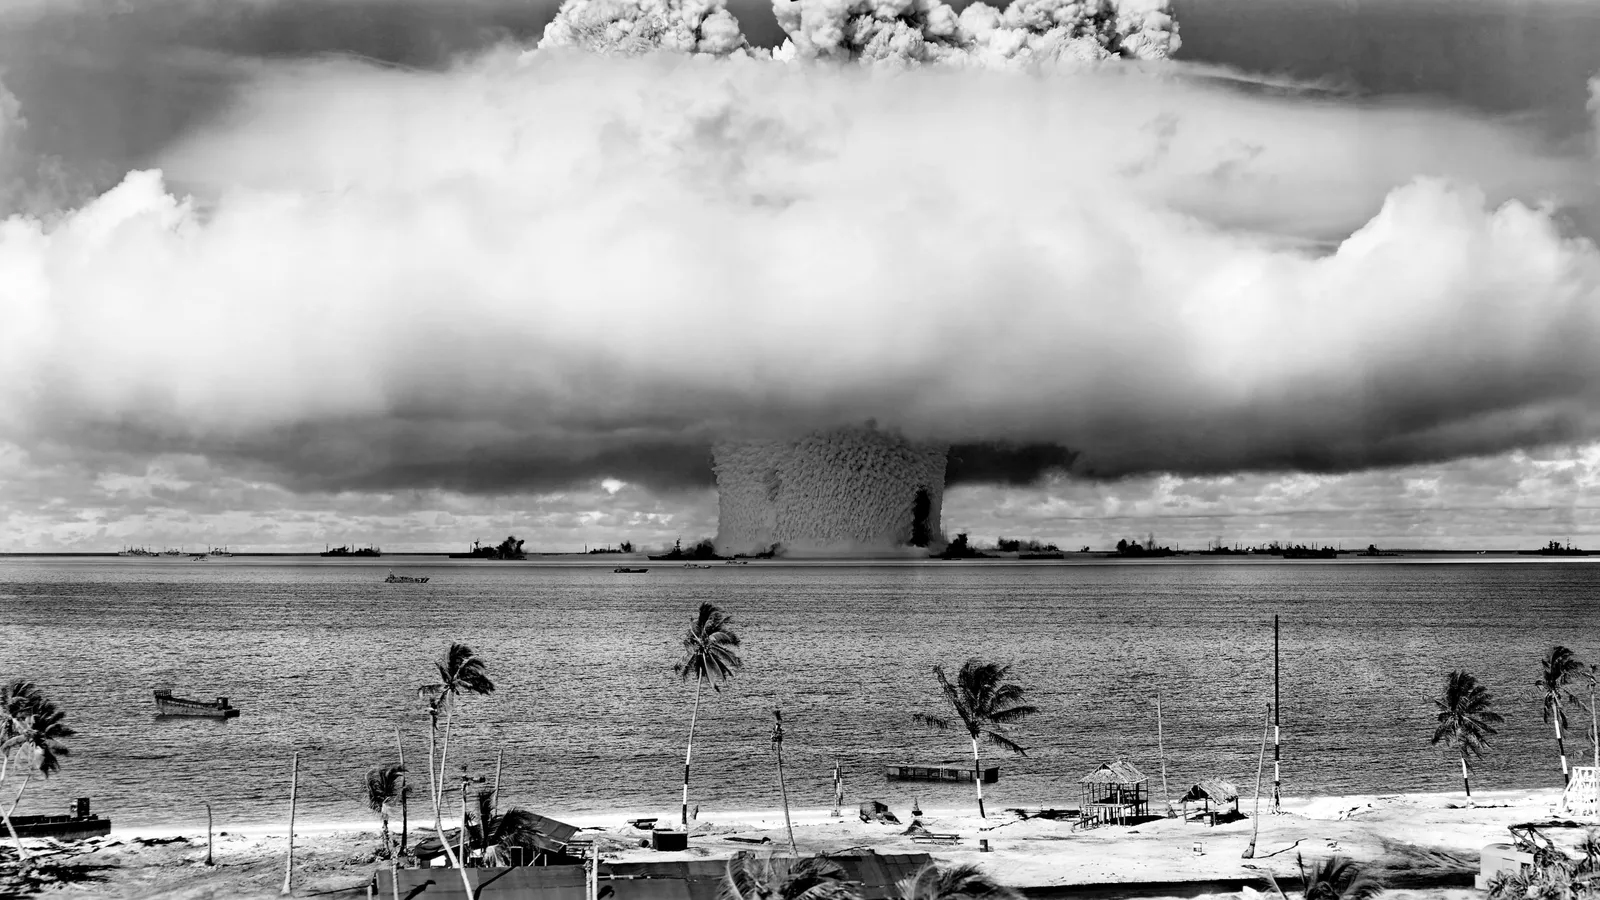 Lost 3 Atomic Bombs